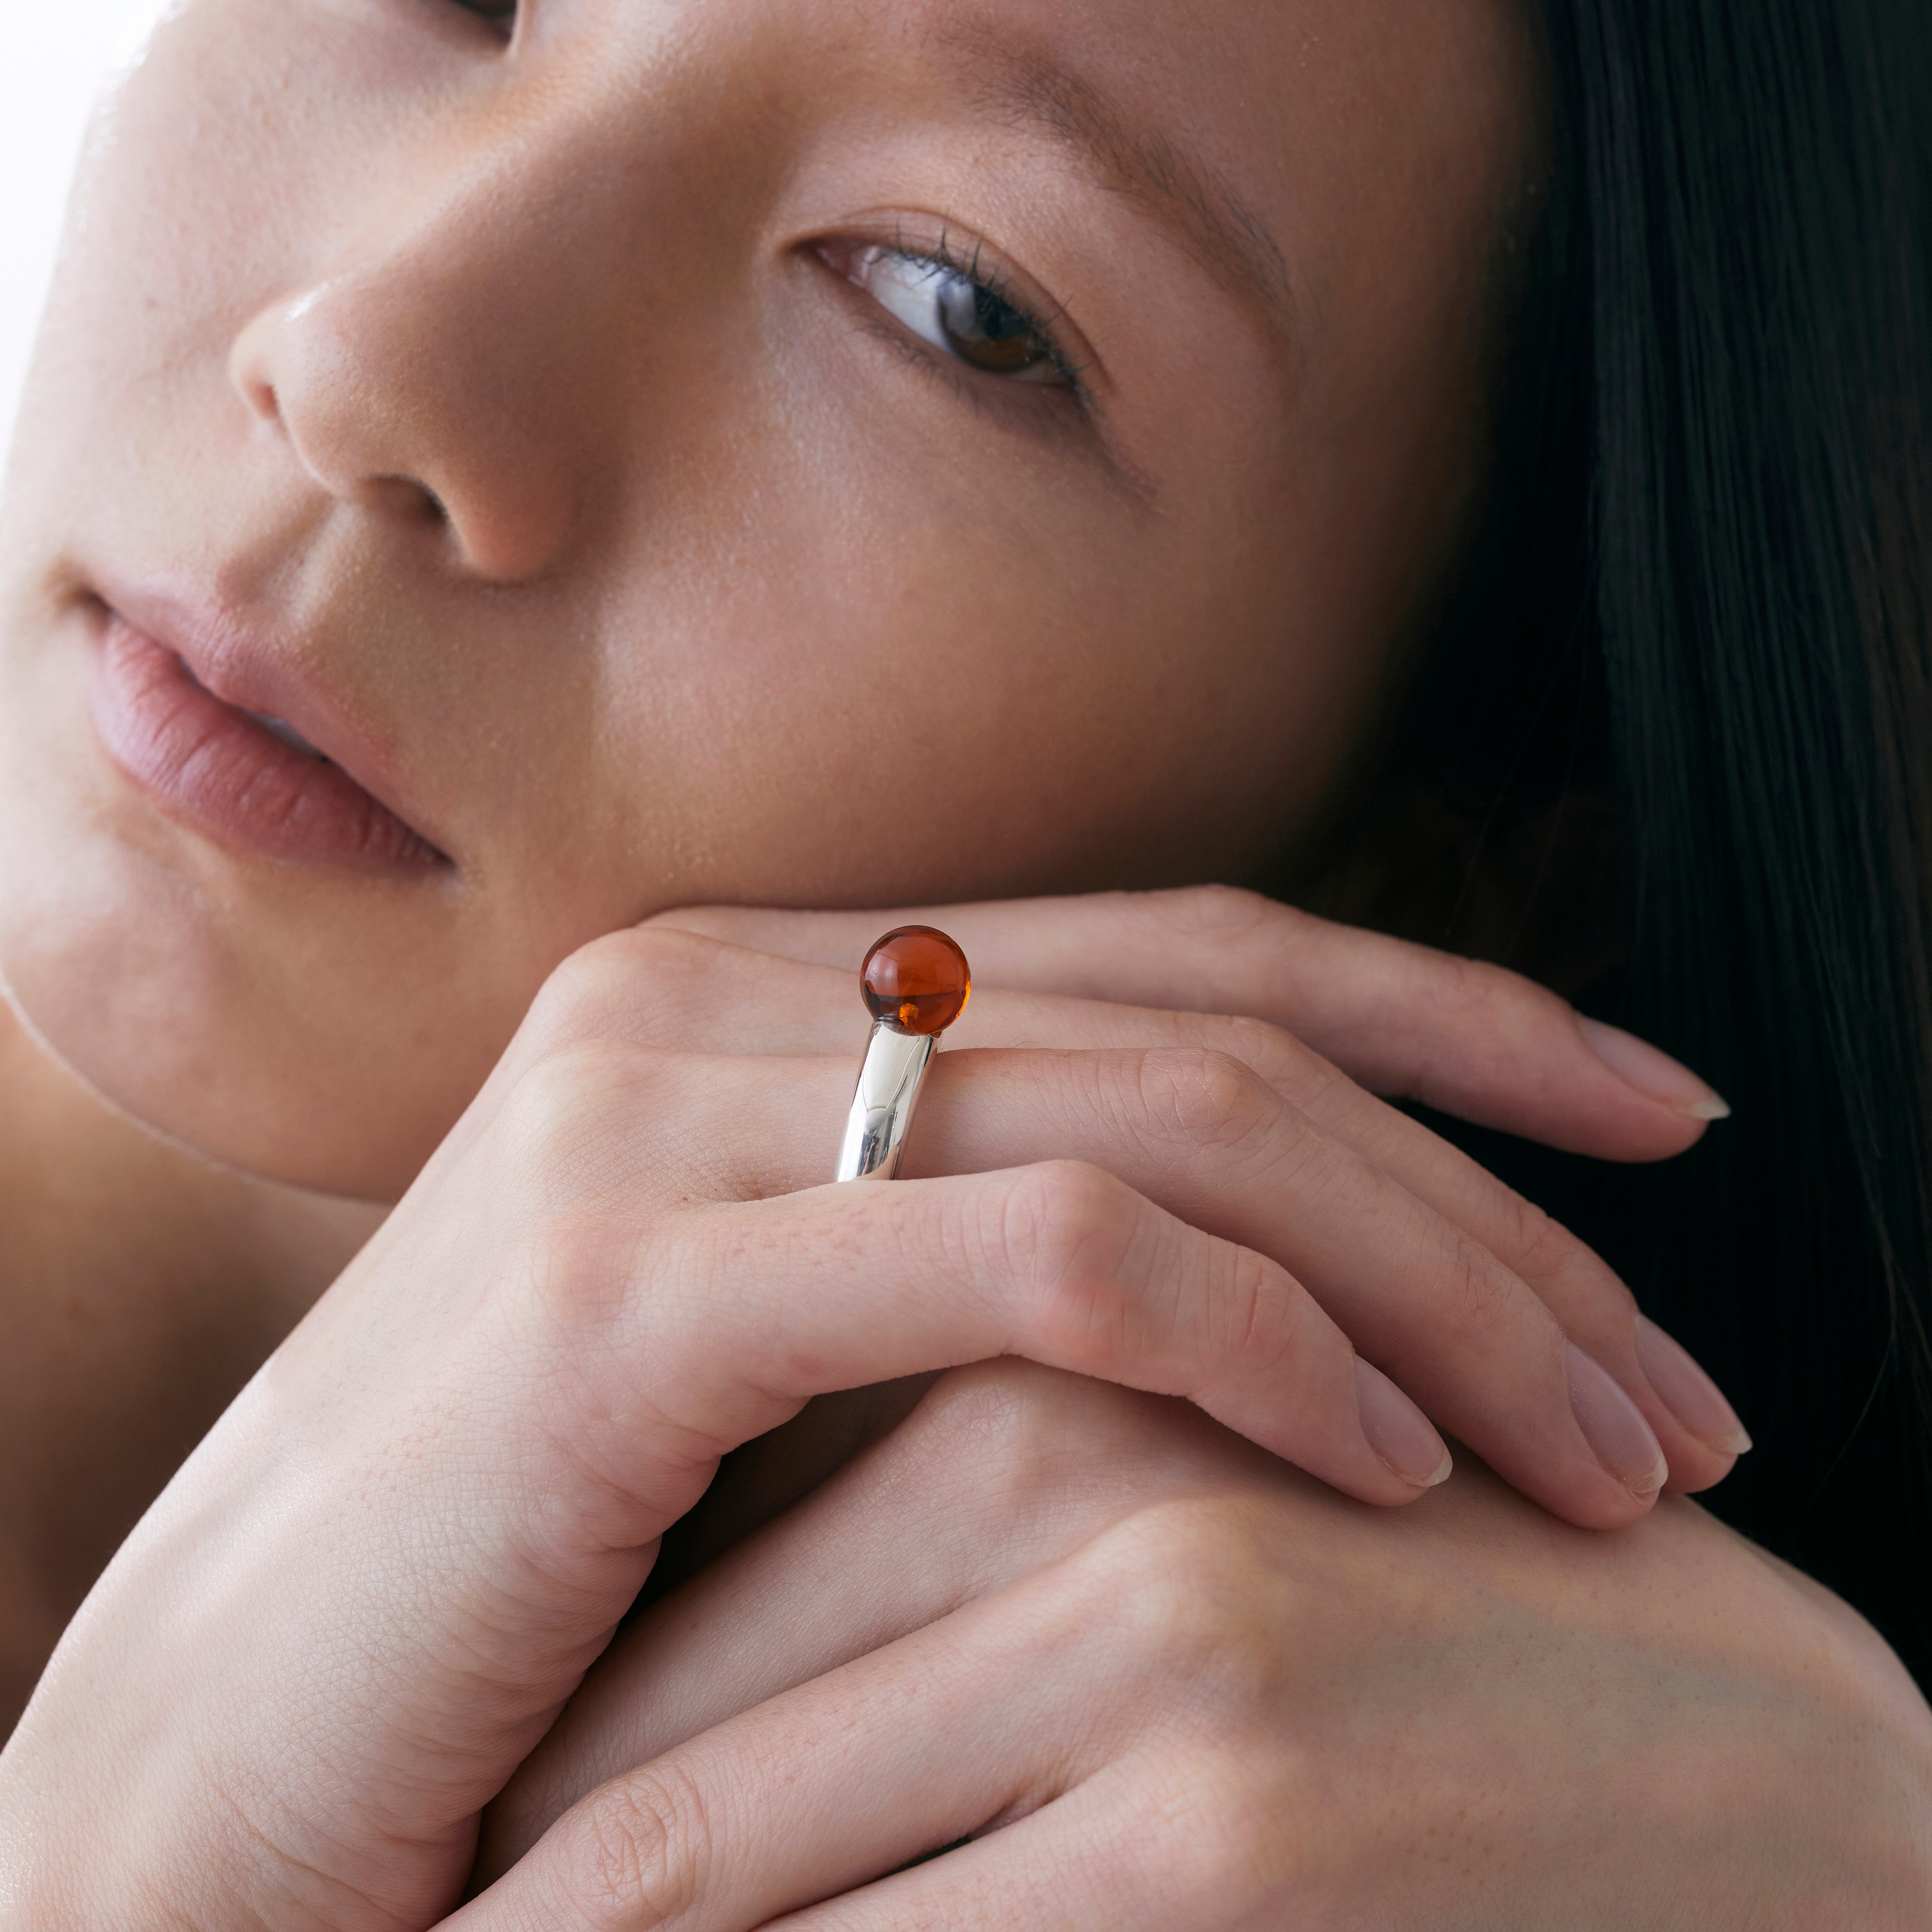 Sphere Amber Ring Brown -Silver-